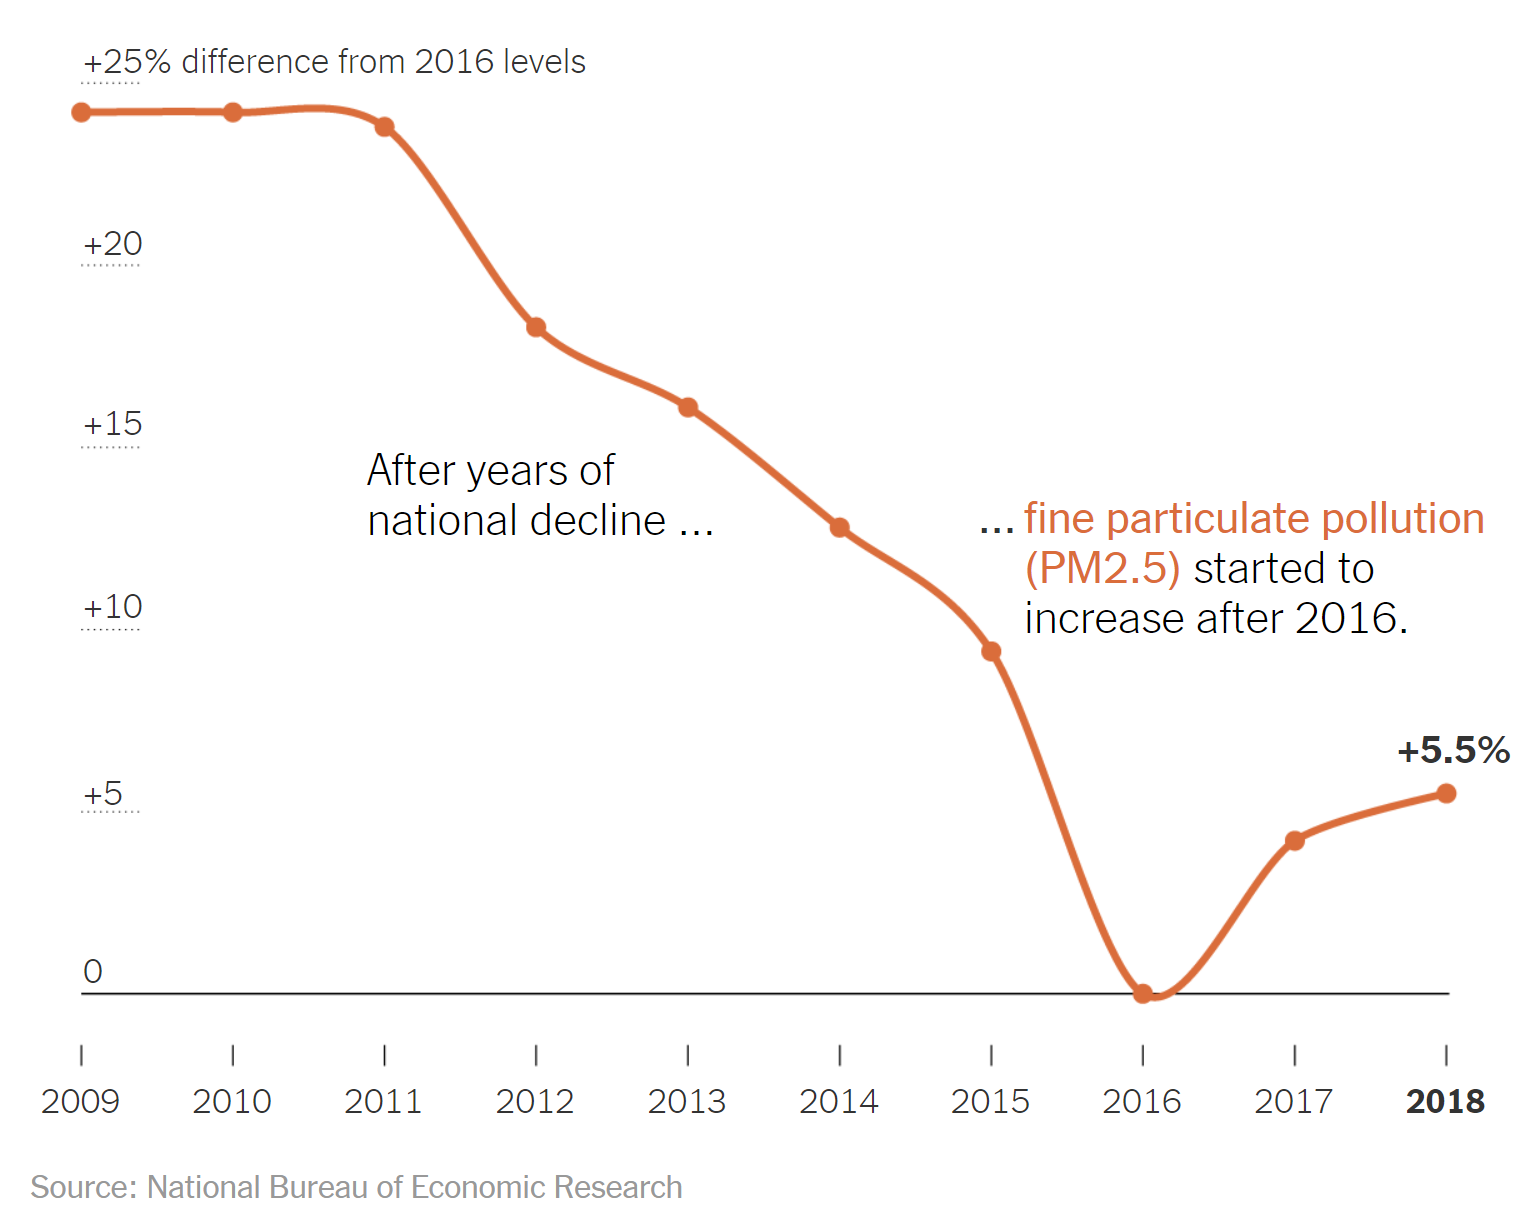 Air pollution (fine particulate matter PM2.5) in the United States, 2009-2018. in 2016, pollution started to increase significantly in the U.S. Midwet West. Data: National Bureau of Economic Research. Graphic: The New York Times